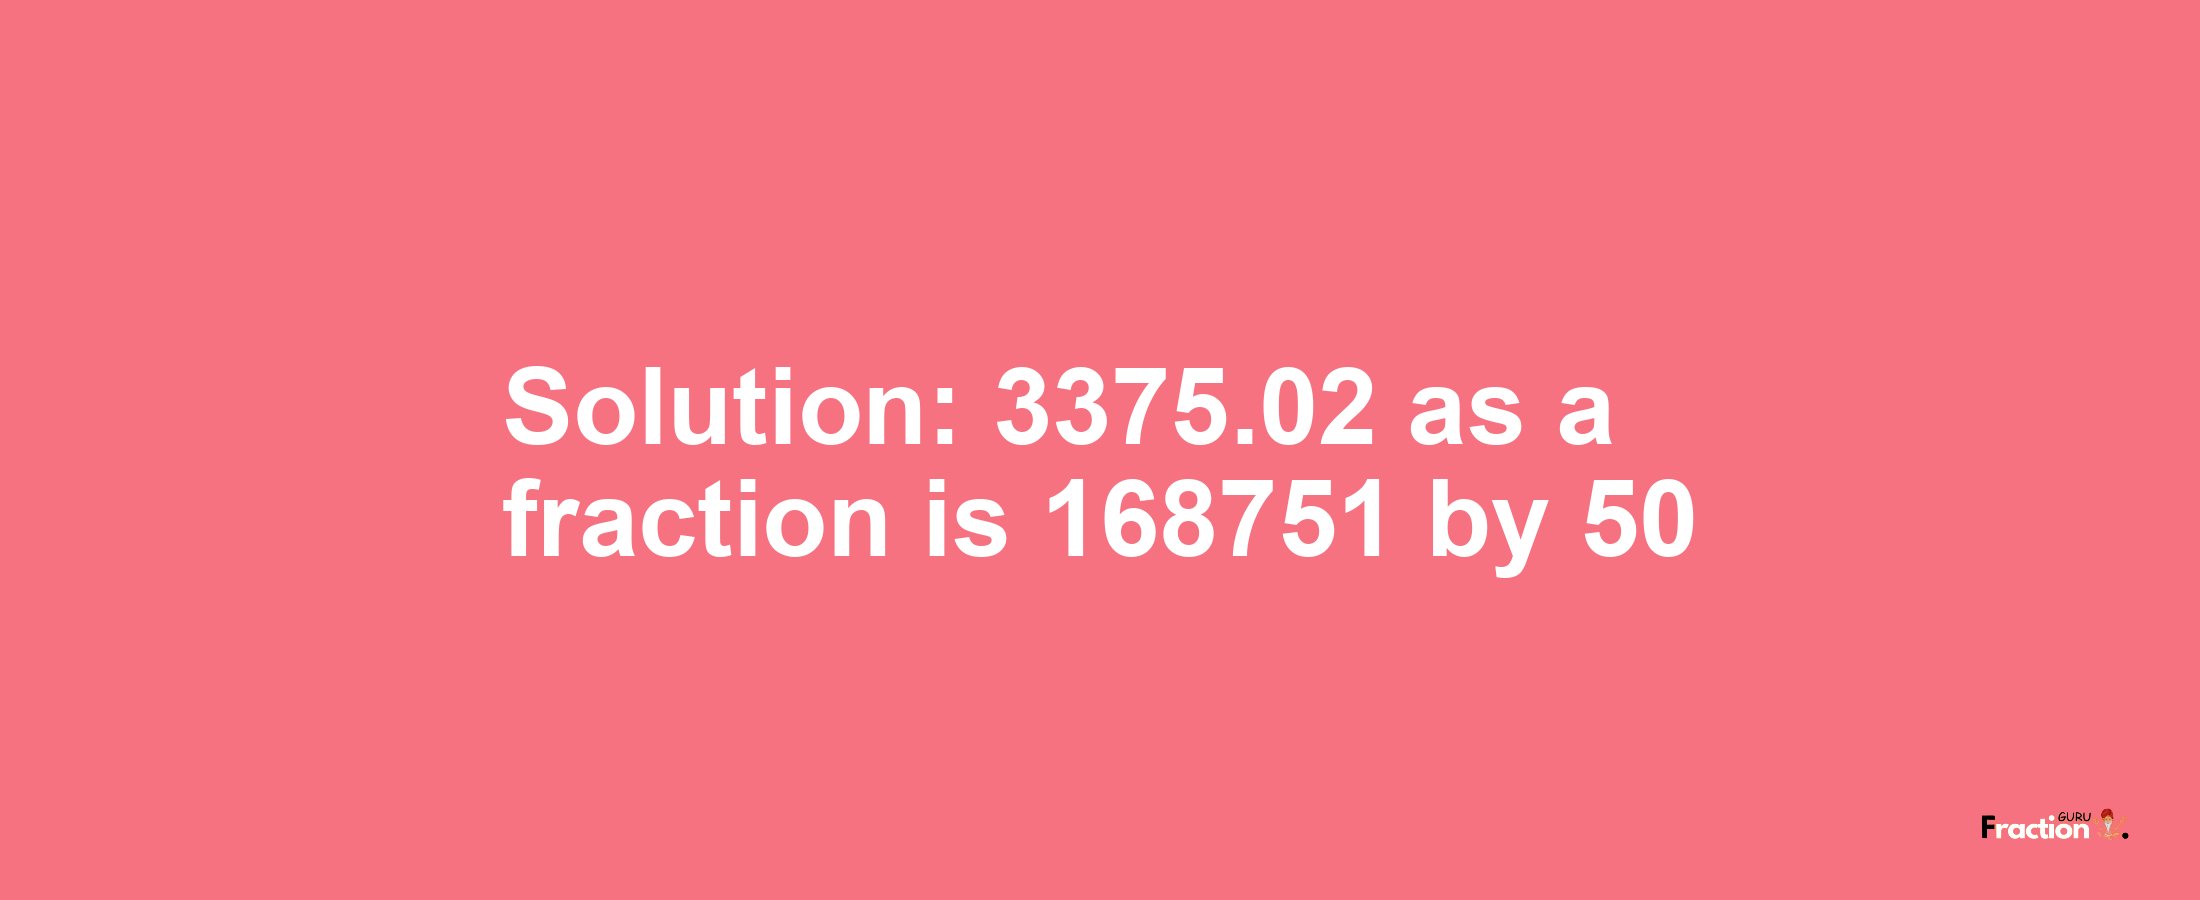 Solution:3375.02 as a fraction is 168751/50